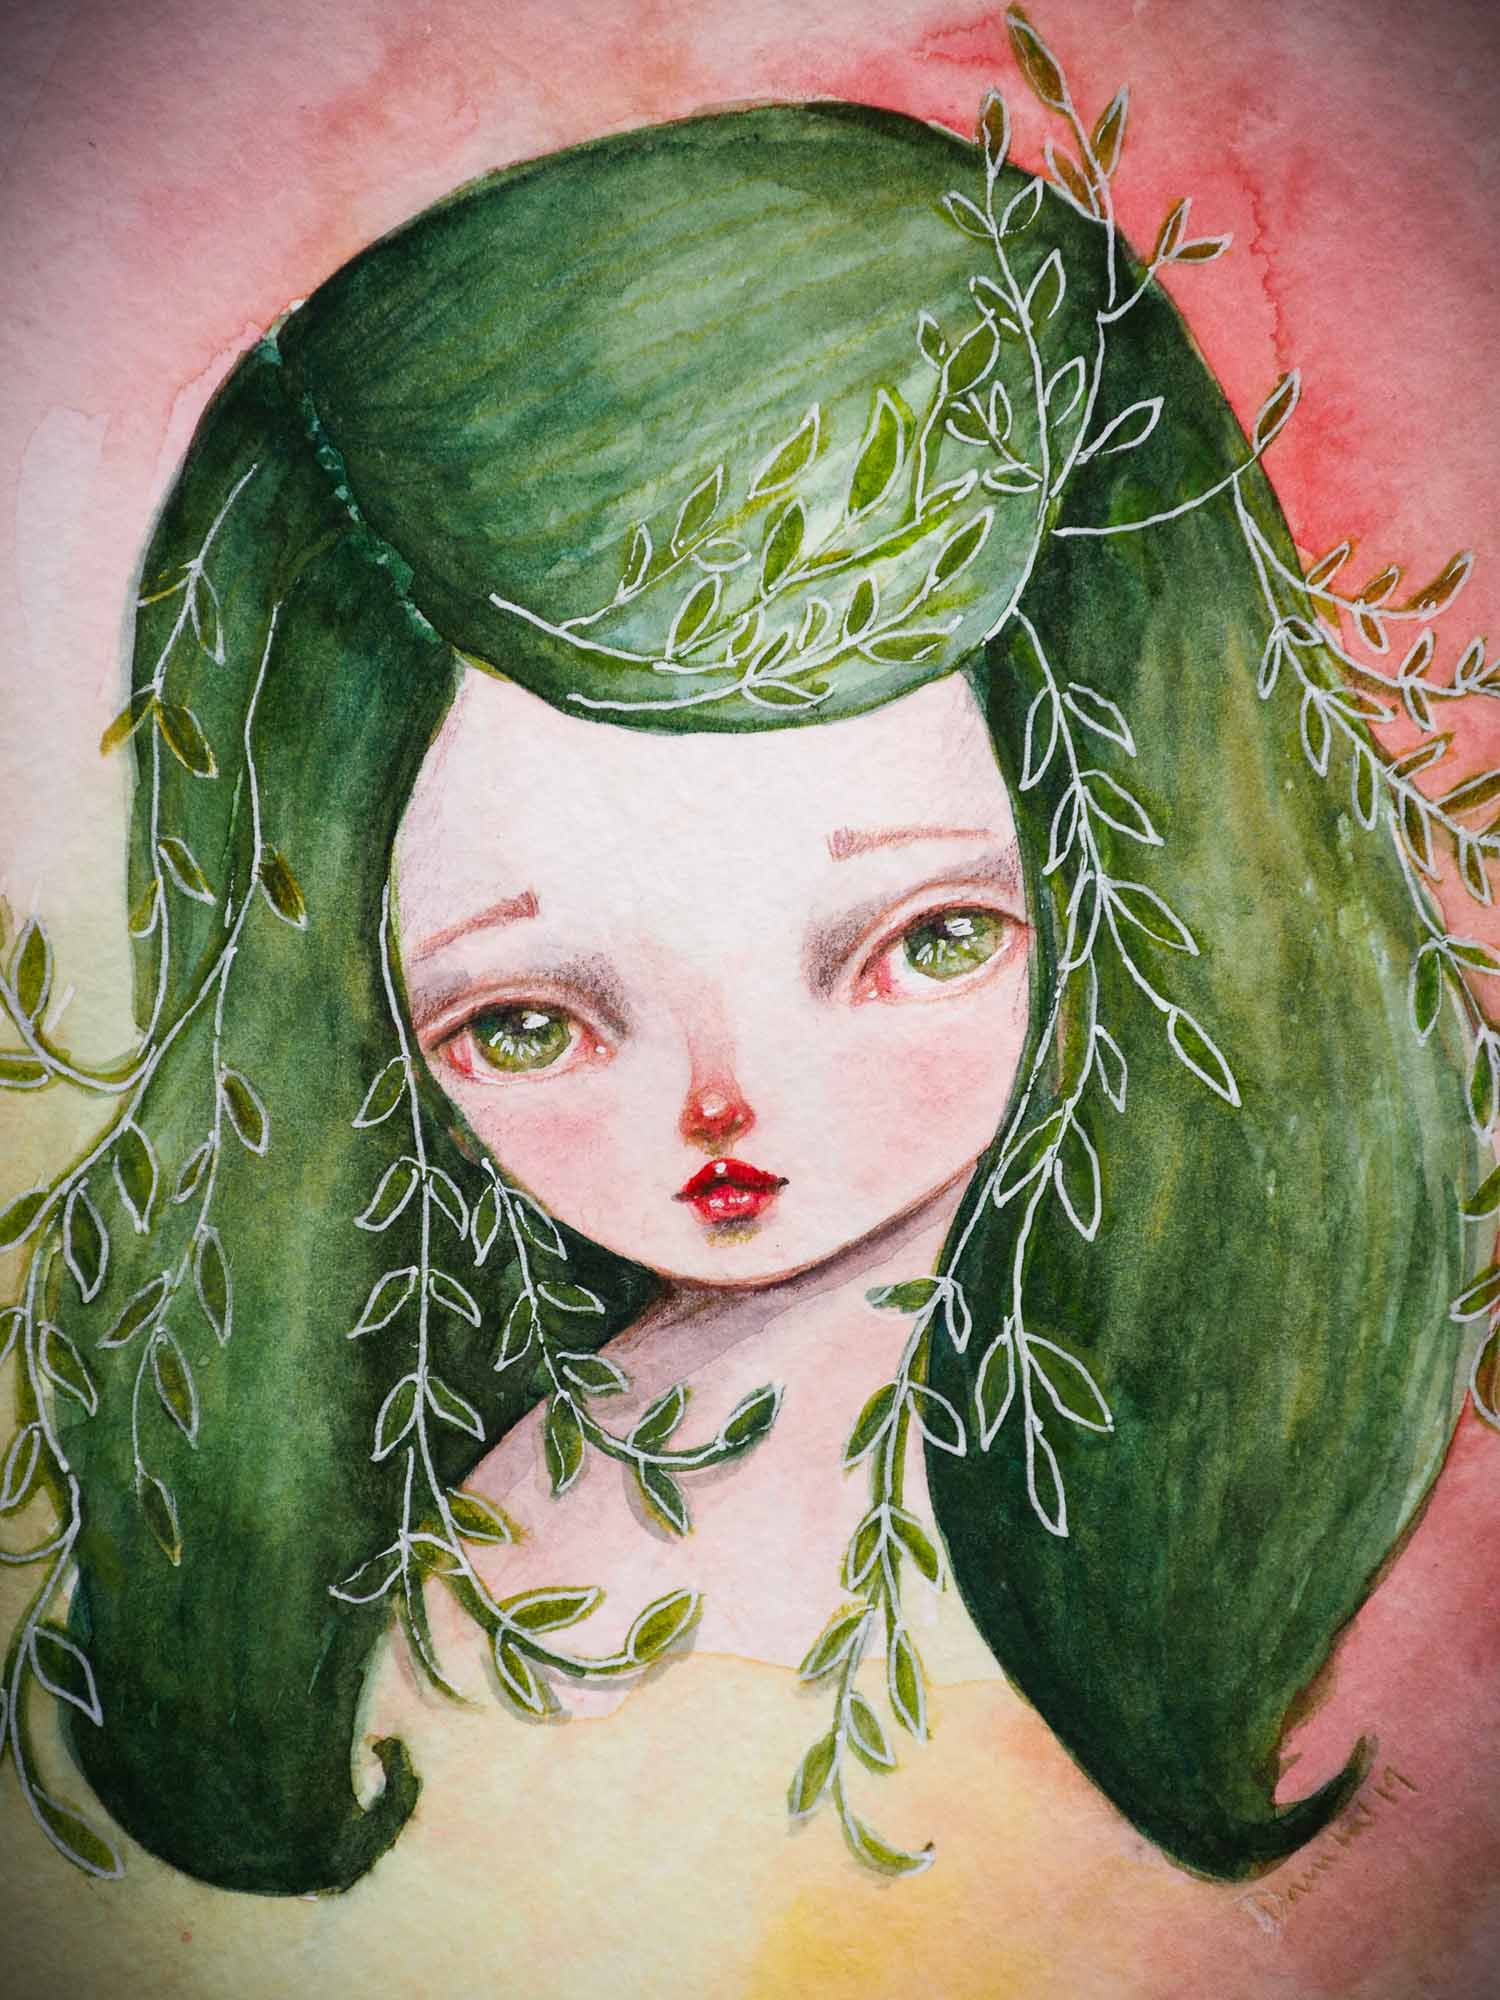 MOTHER OF PLANTS, a fantasy inspired watercolor painting on paper by Danita Art. This girl has leaves in her hair and earth tones that will match nicely a home full of plants and nature. By Danita Art.